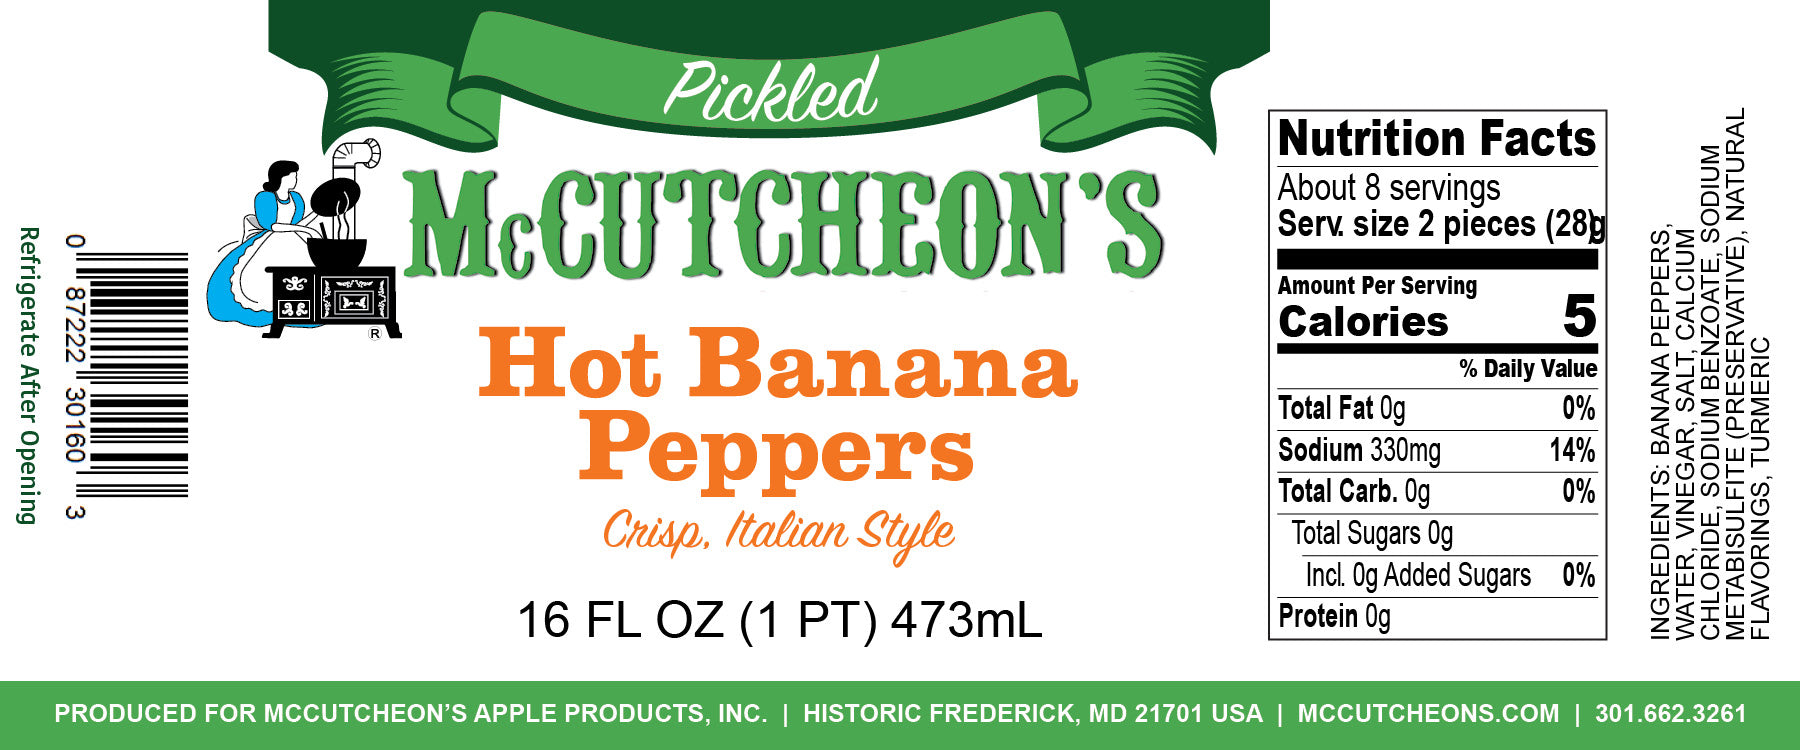 nutrition label for McCutcheon's hot banana peppers